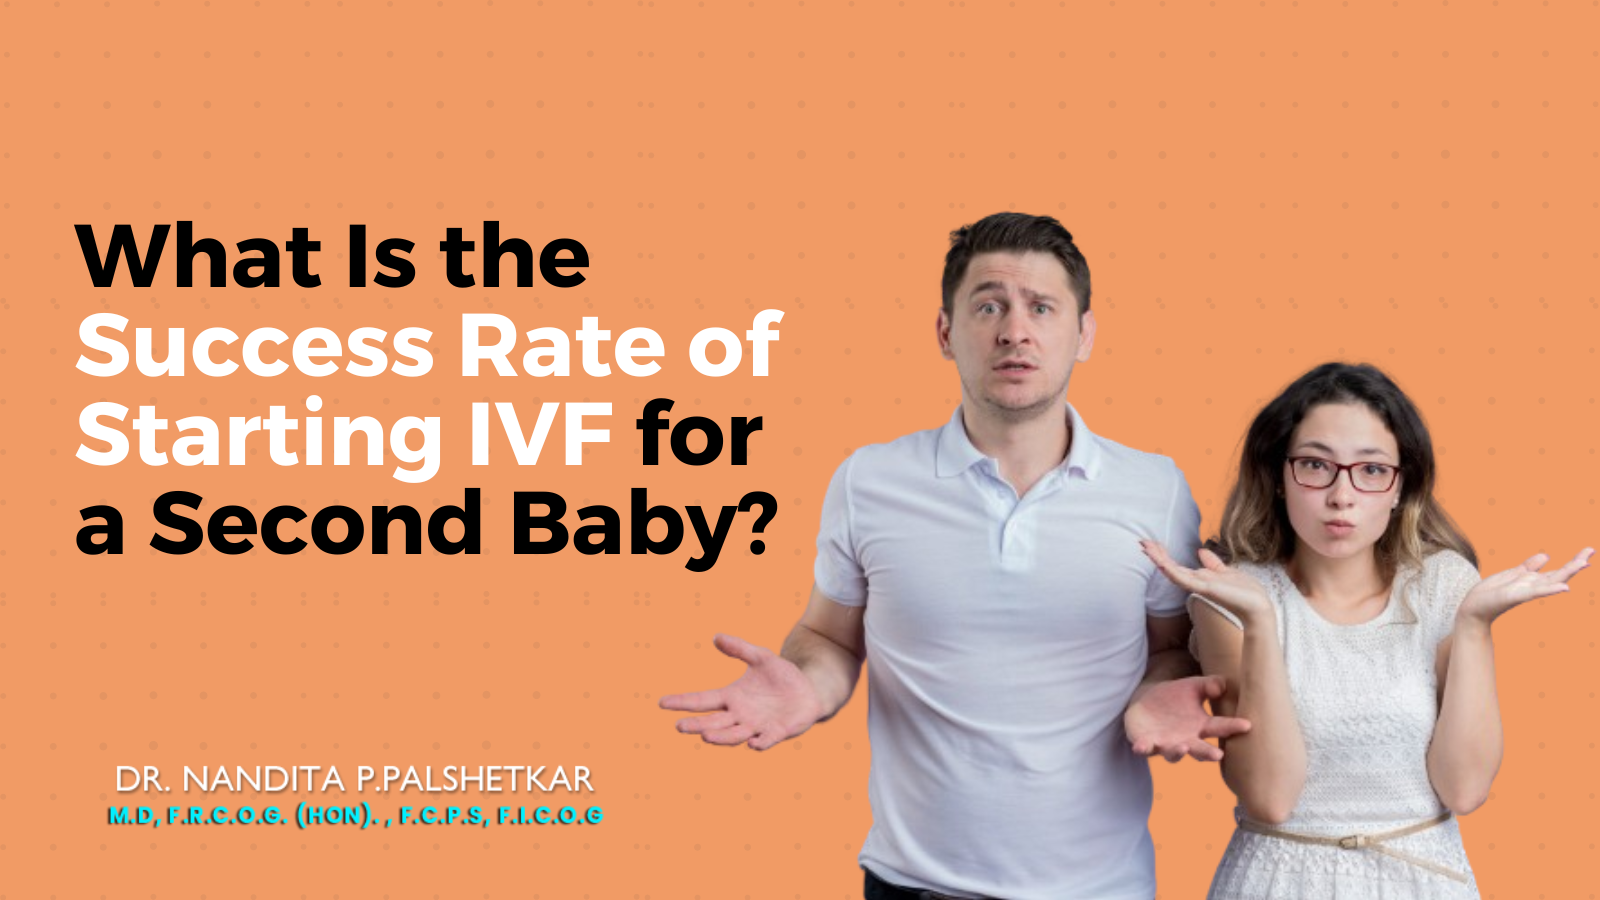 success rate of starting ivf for second baby